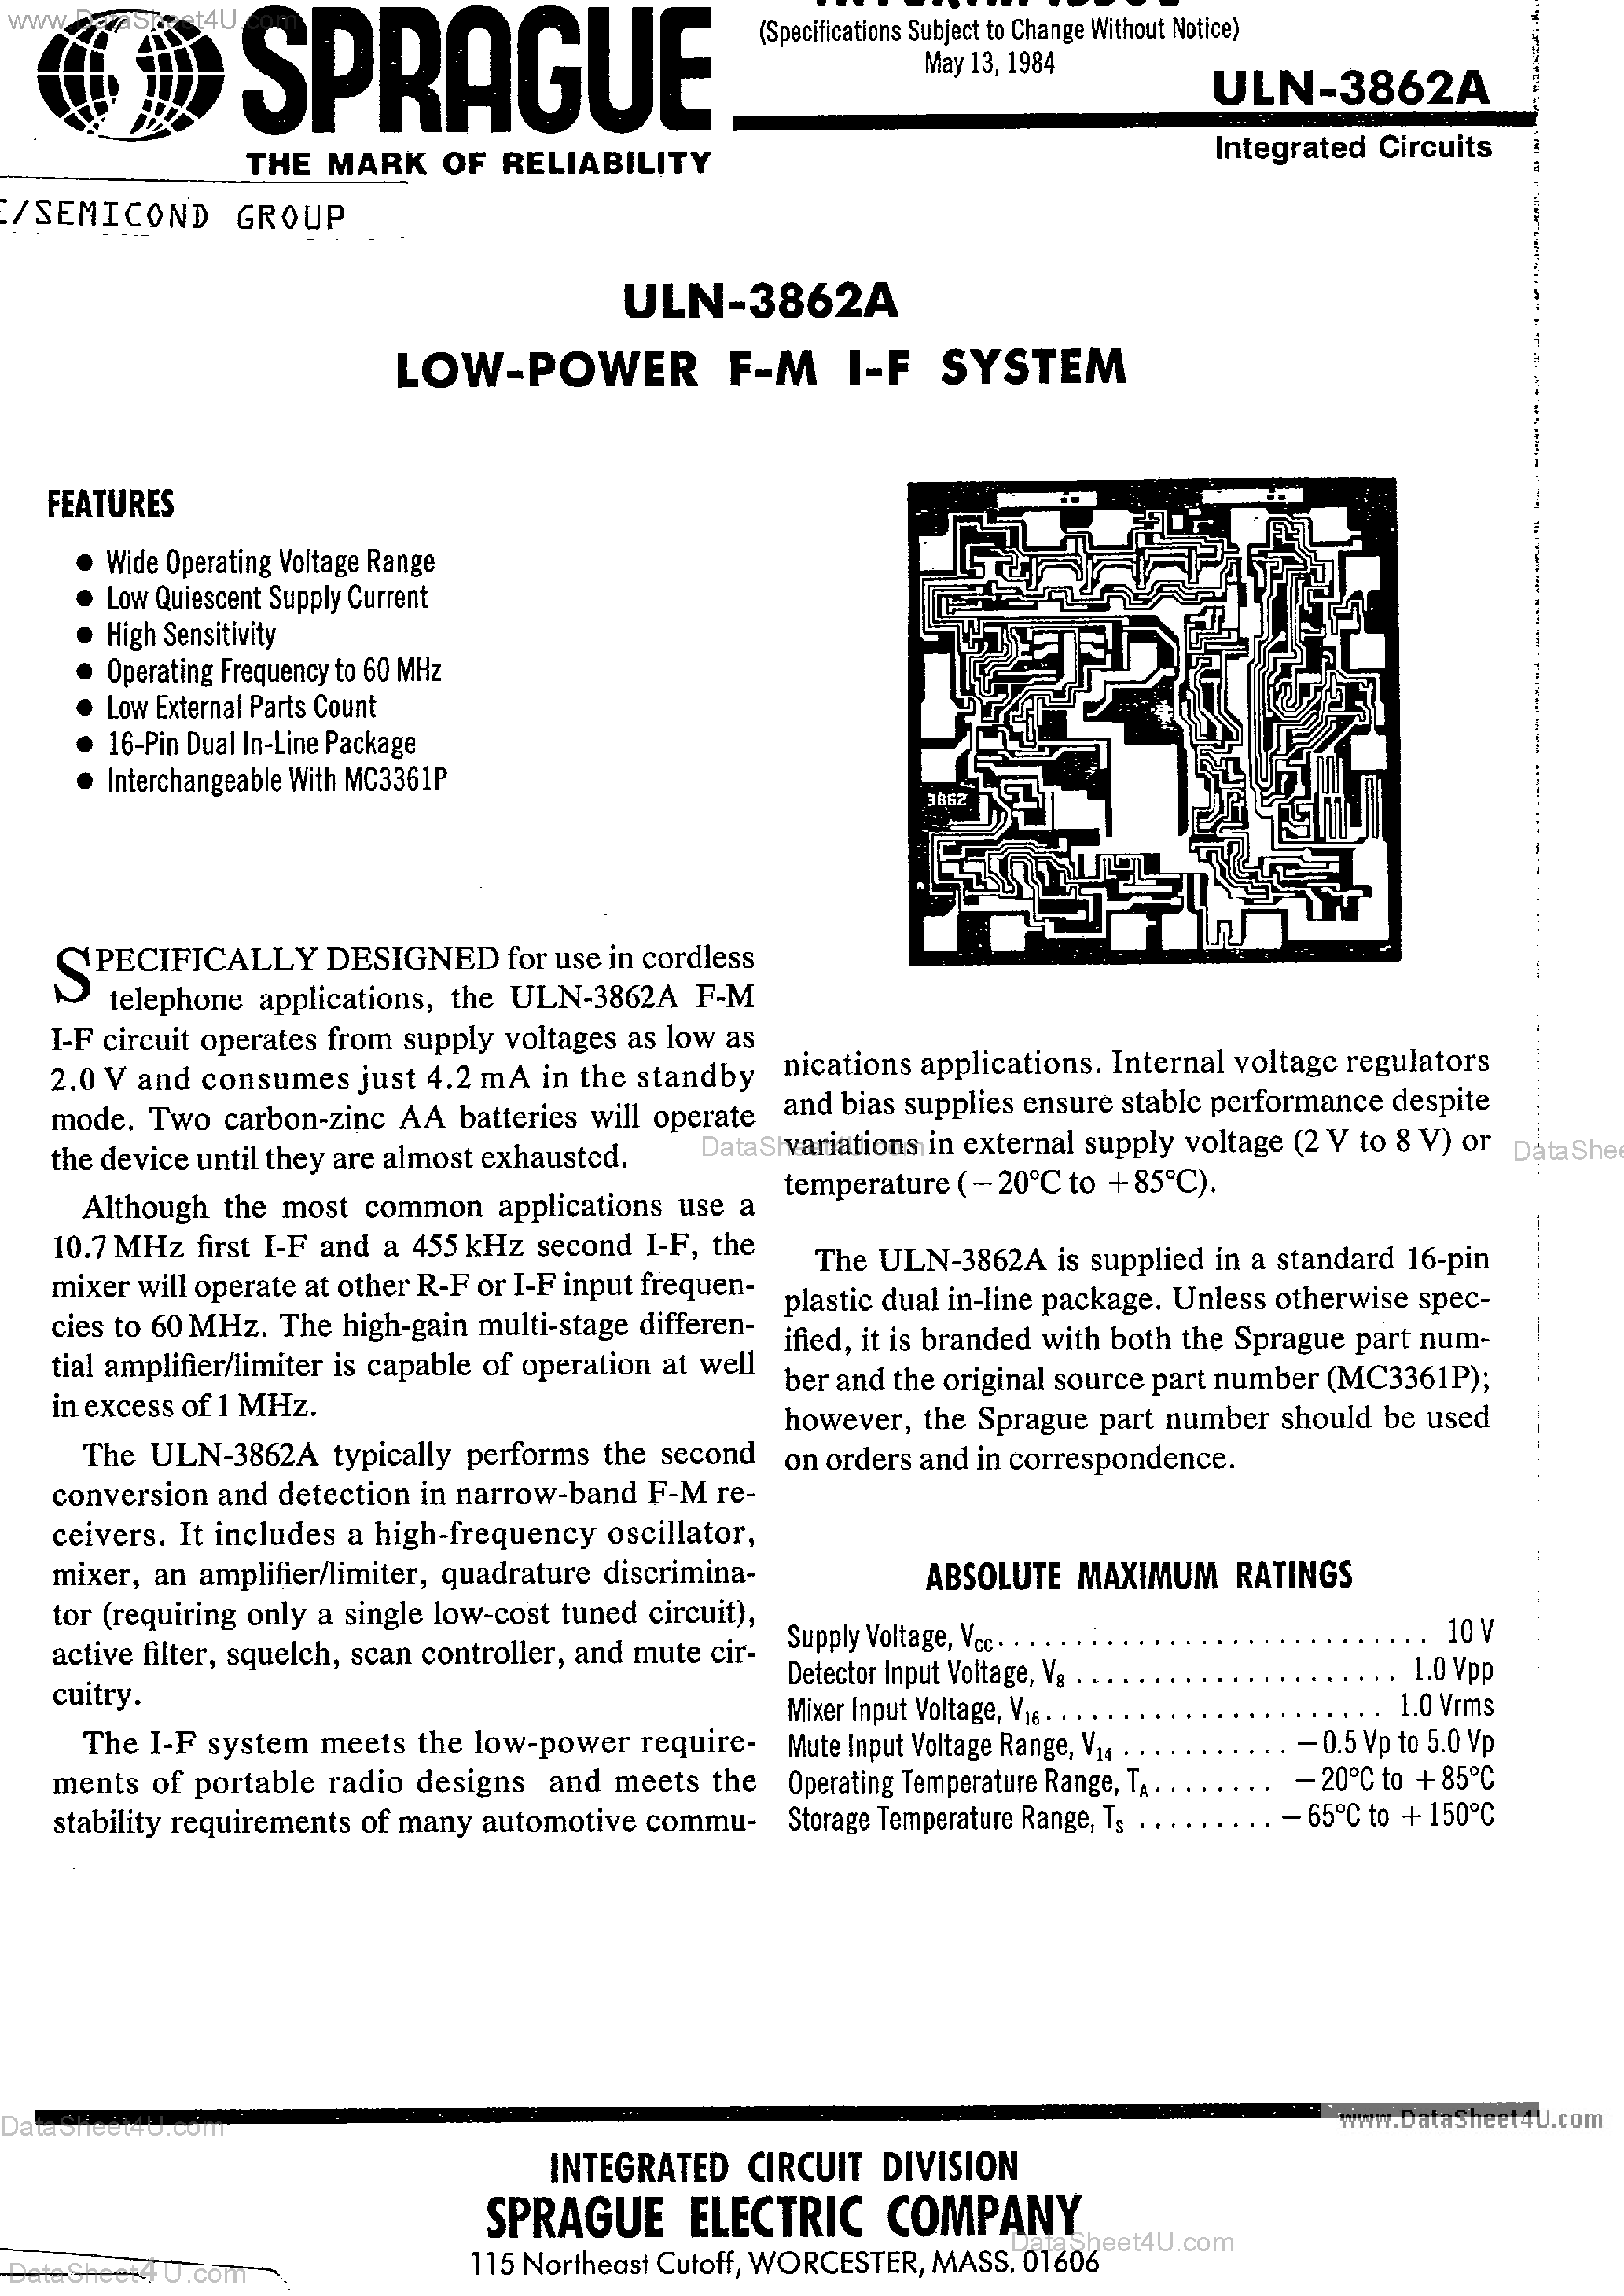 Datasheet ULN-3862A - Low Power FM IF System page 1